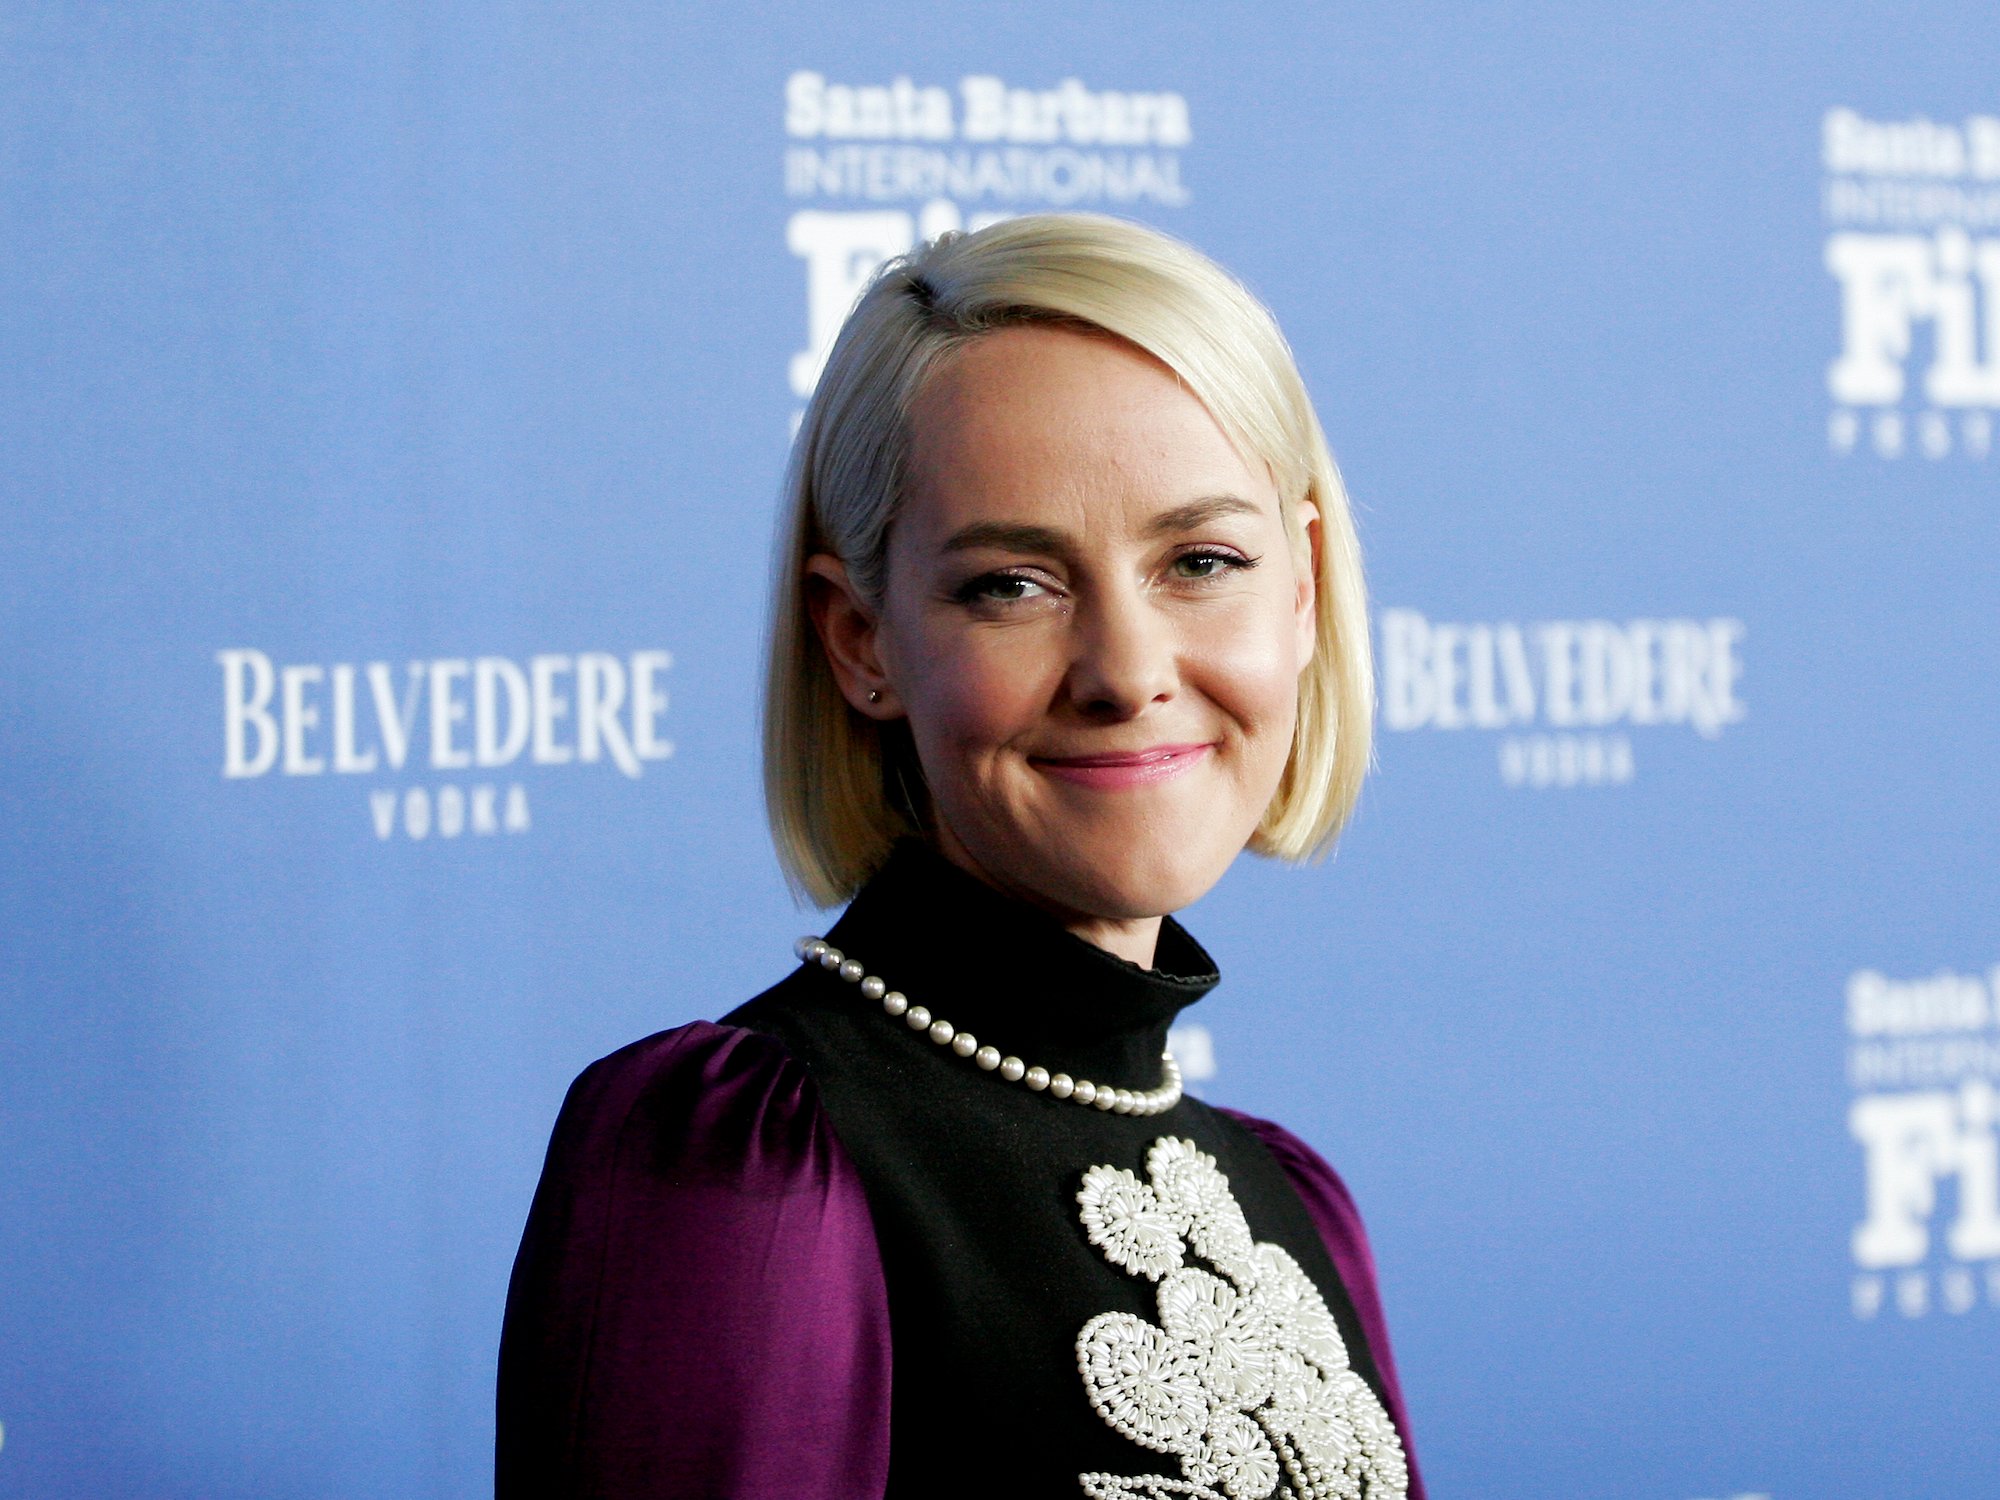 Jena Malone smiling in front of a blue background